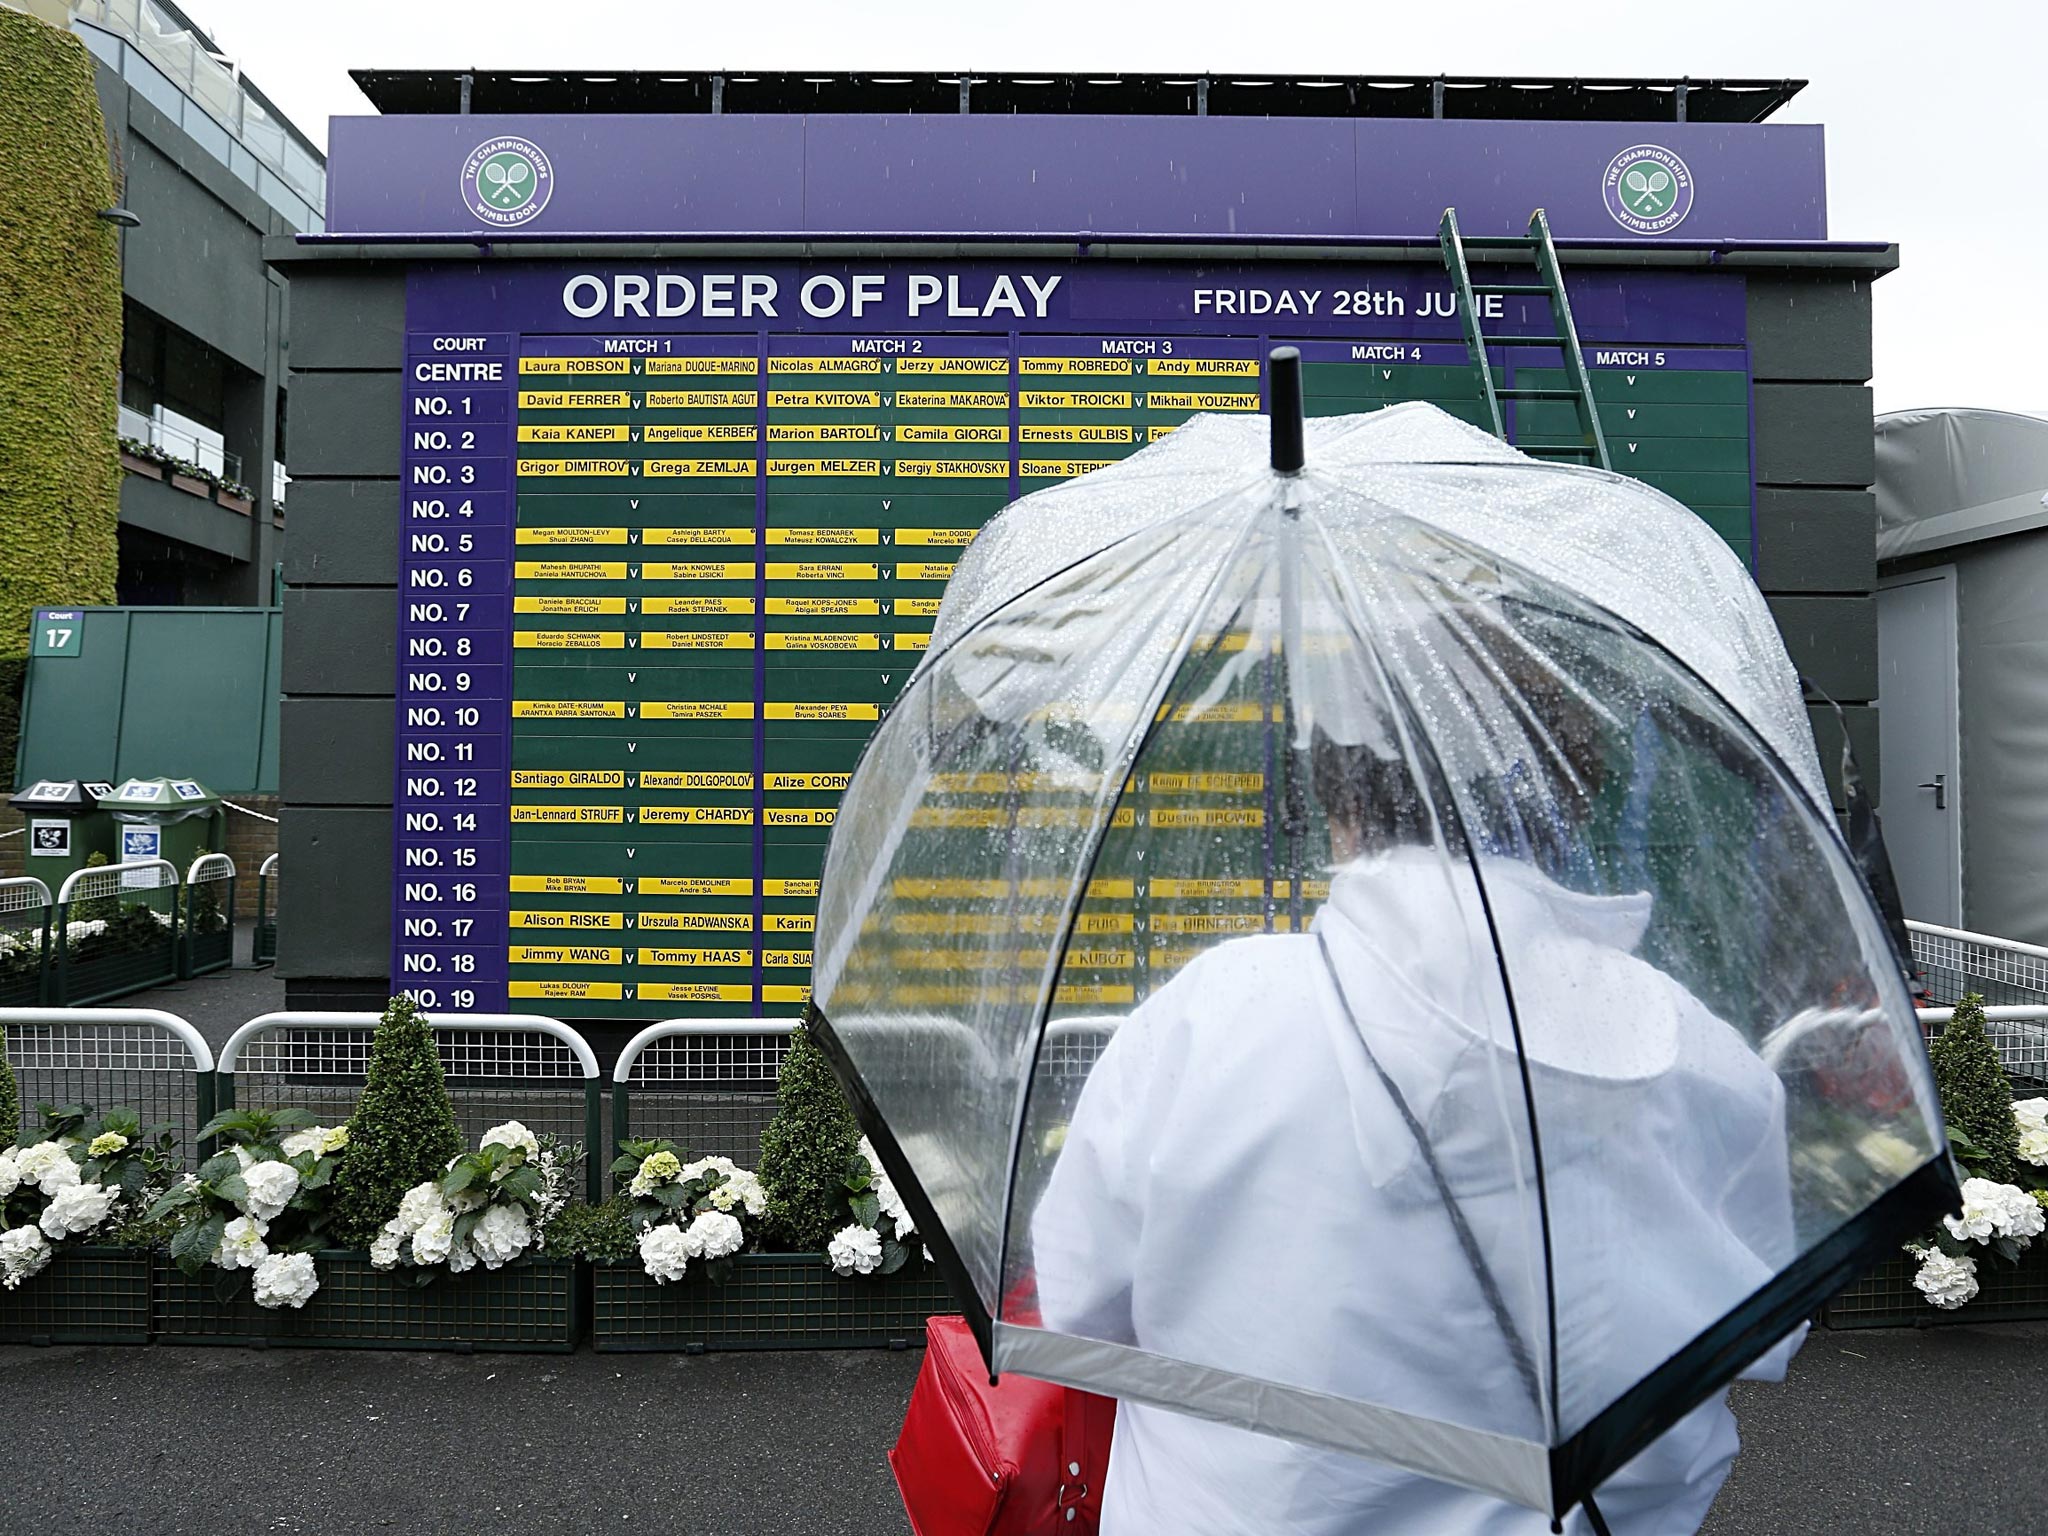 28 June 2013: A fan checks the days order of play under an umbrella during day five of the Wimbledon